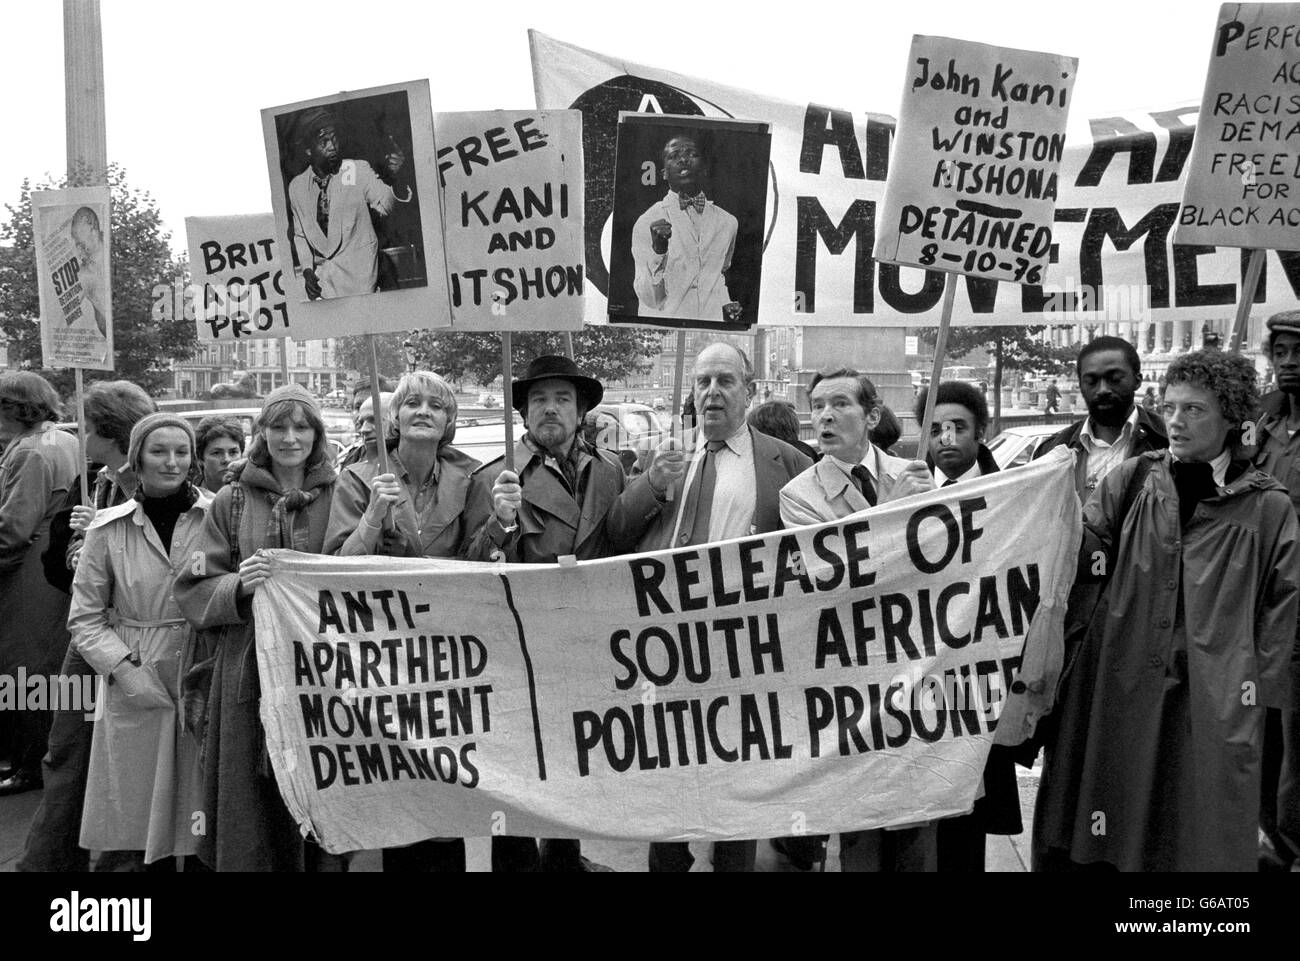 7154.Poster of South Africa man.White only eye reflection.Anti apartheid racism. 